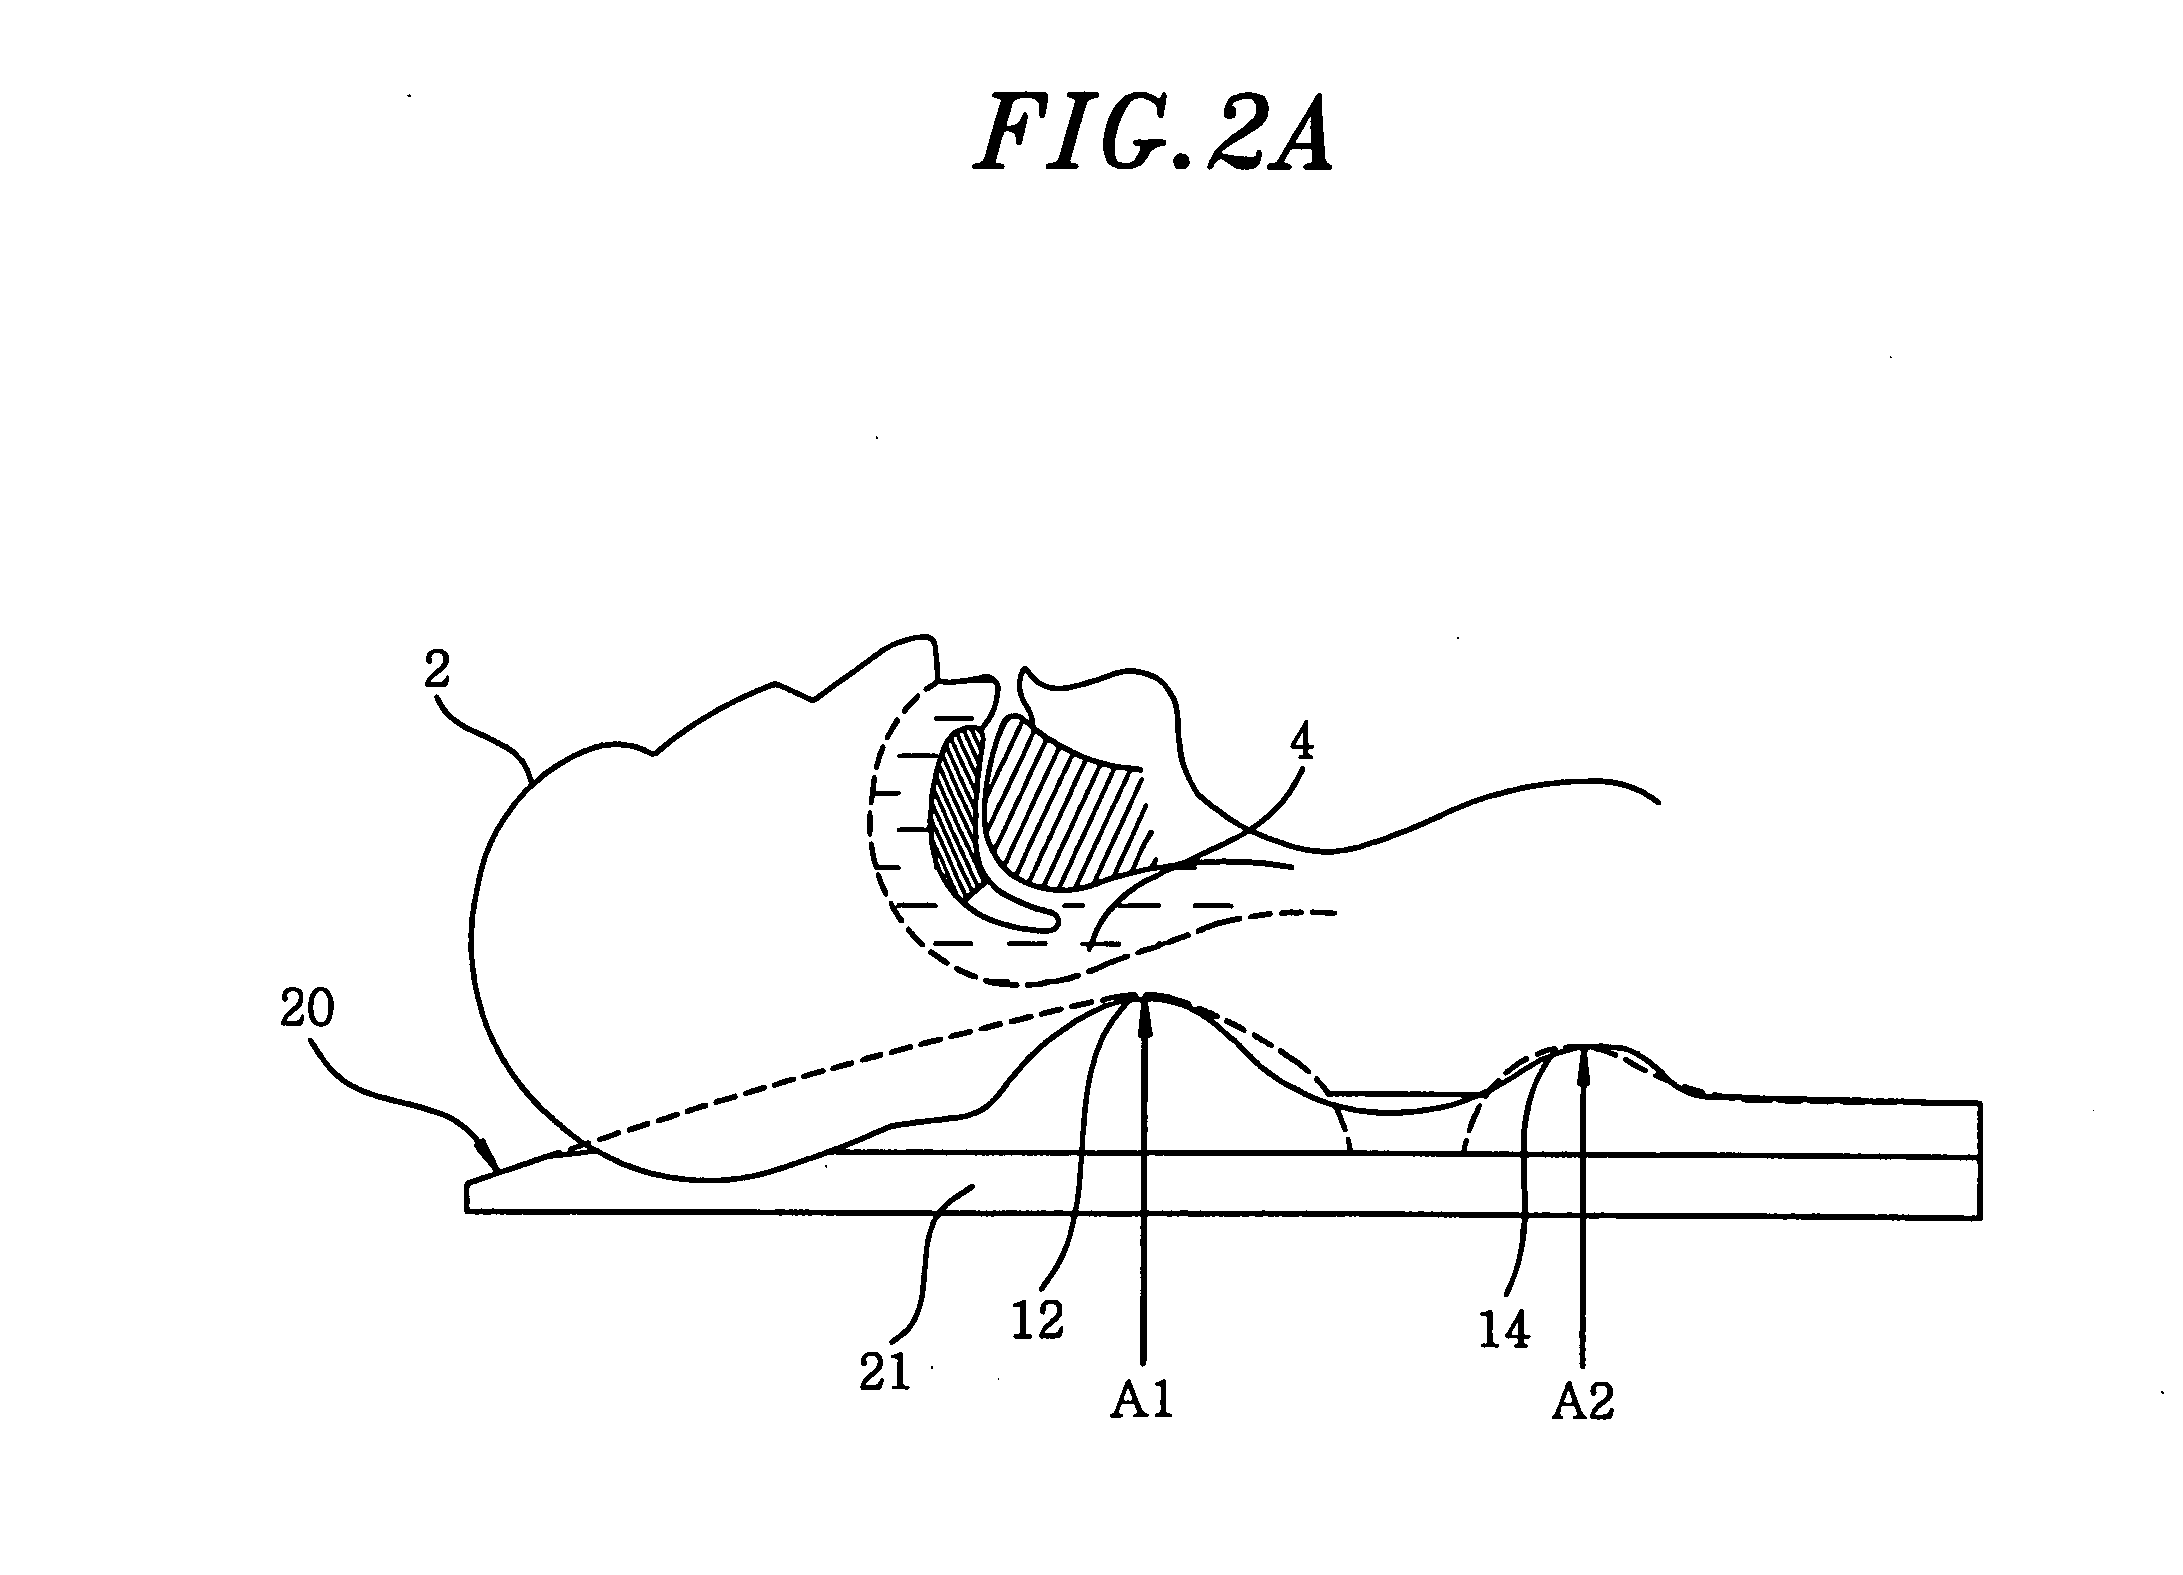 Apparatus for preventing sleeping respiratory obstruction